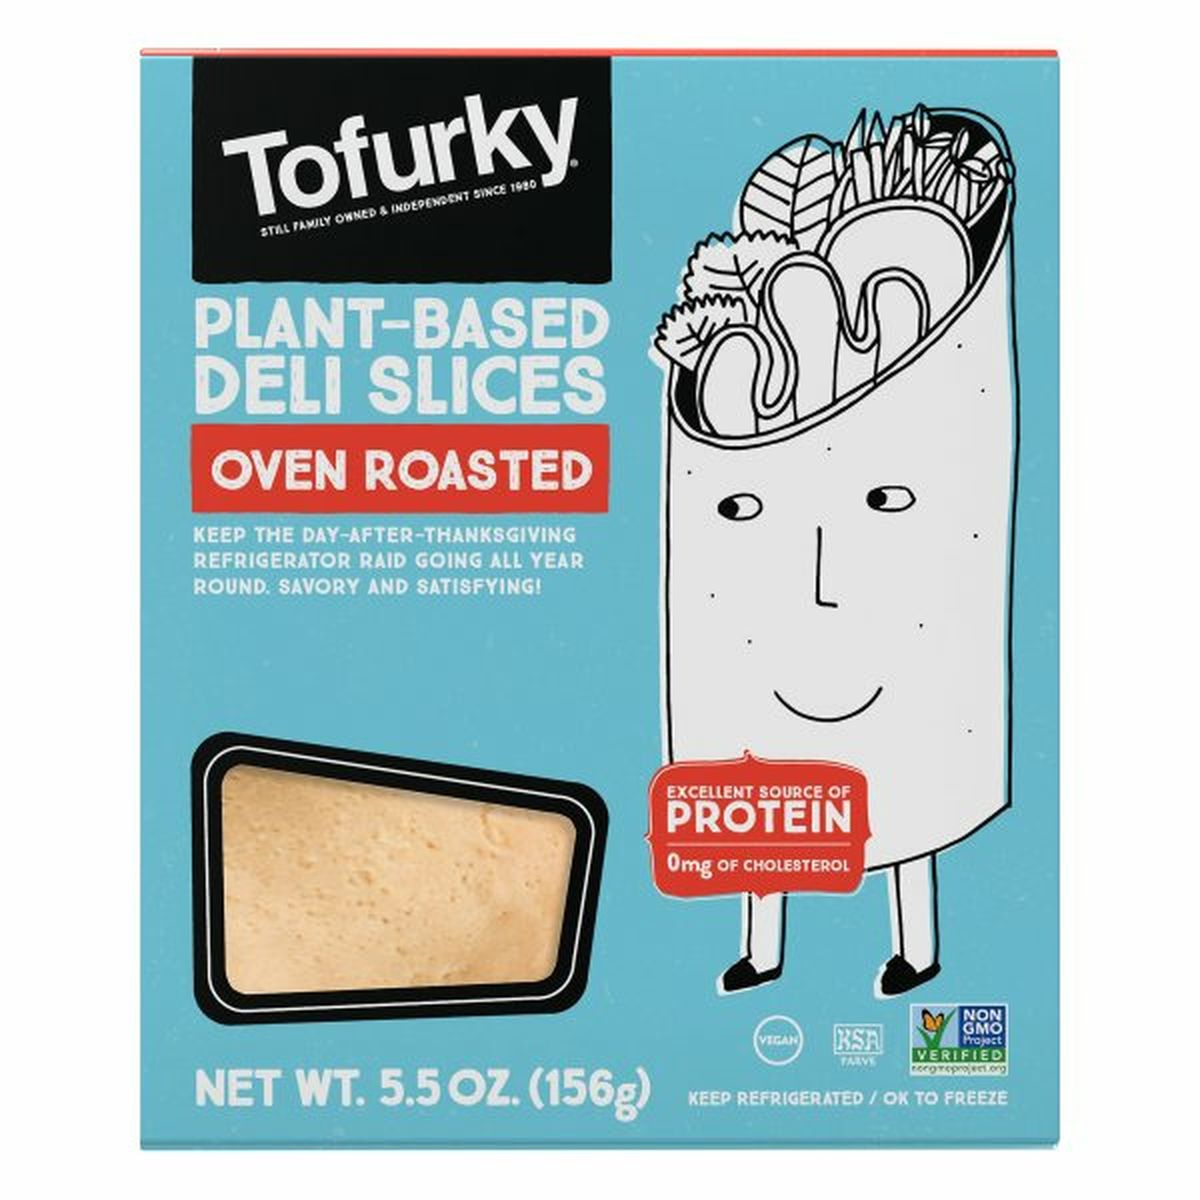 Calories in Tofurky Deli Slices, Plant-Based, Oven Roasted